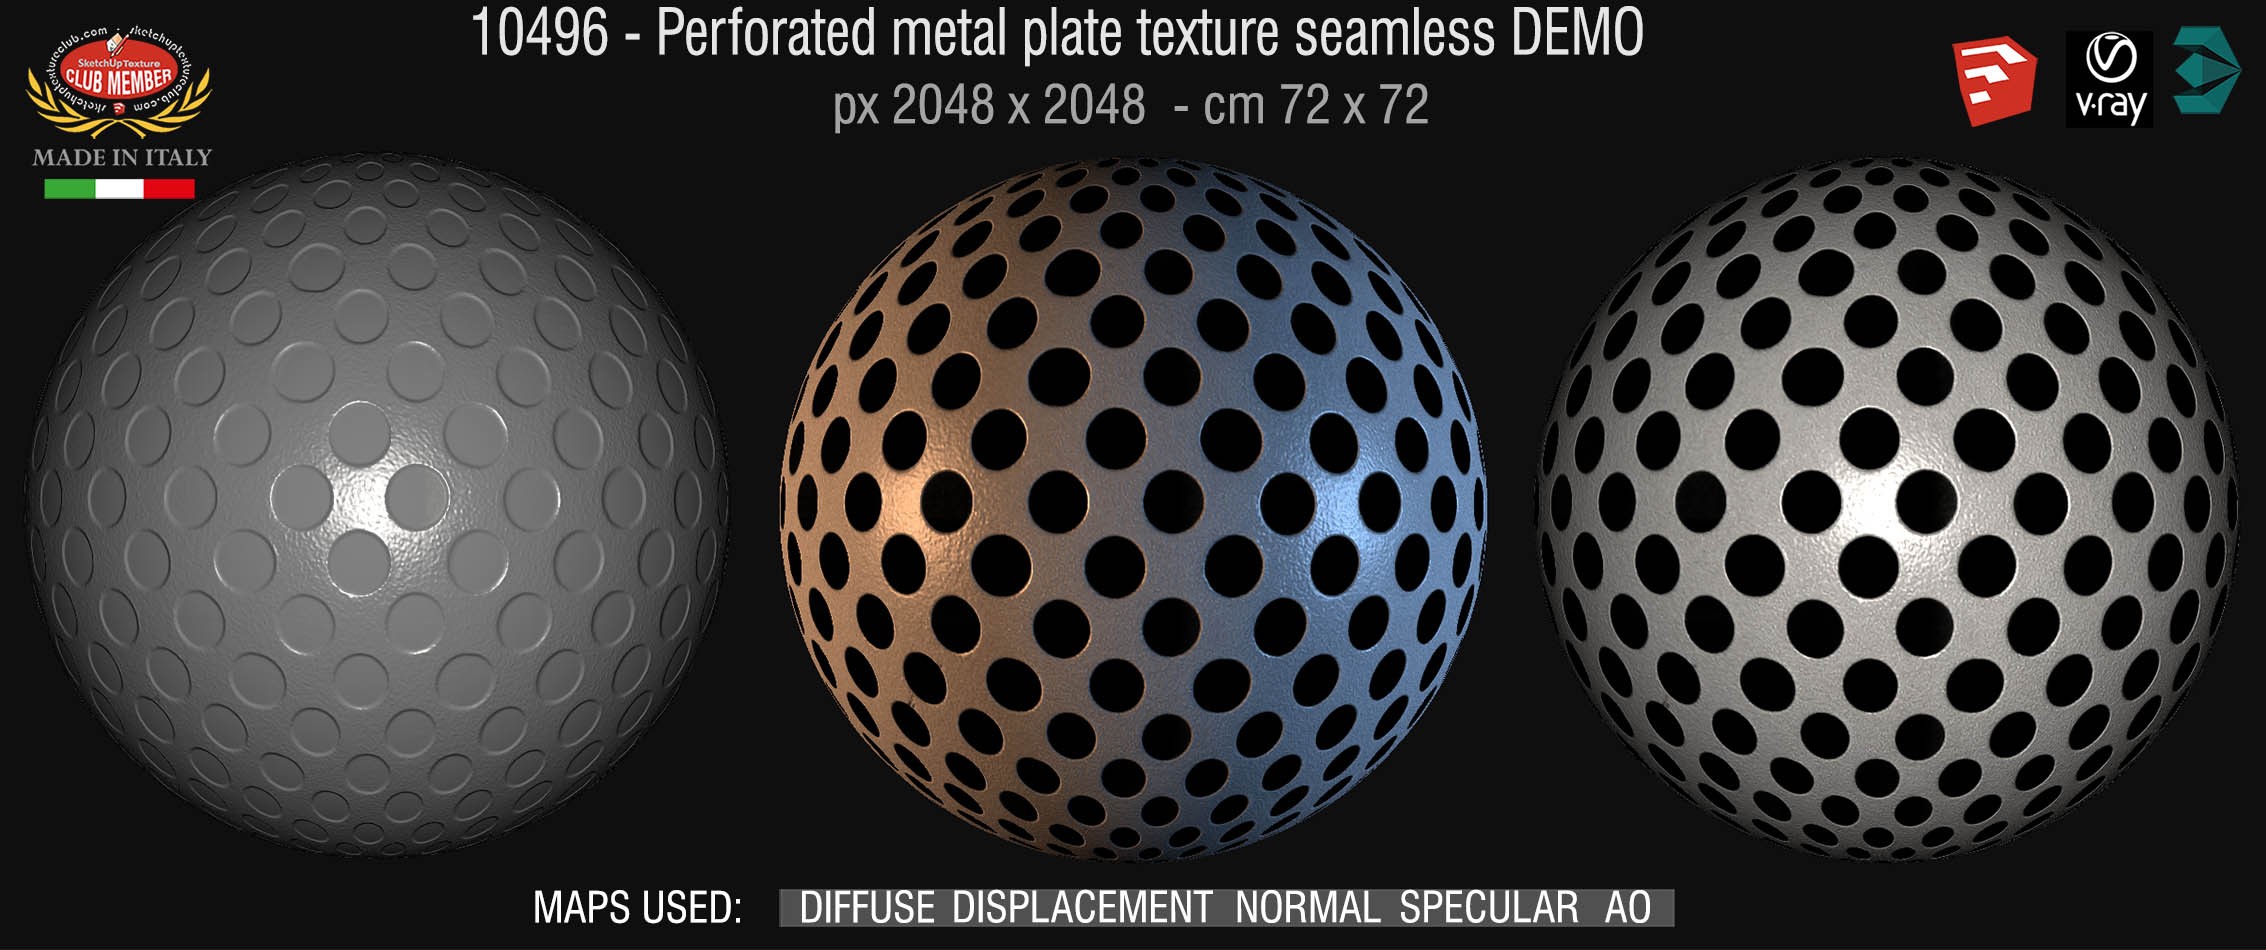 10496 HR Perforated metal plate texture seamless + maps DEMO